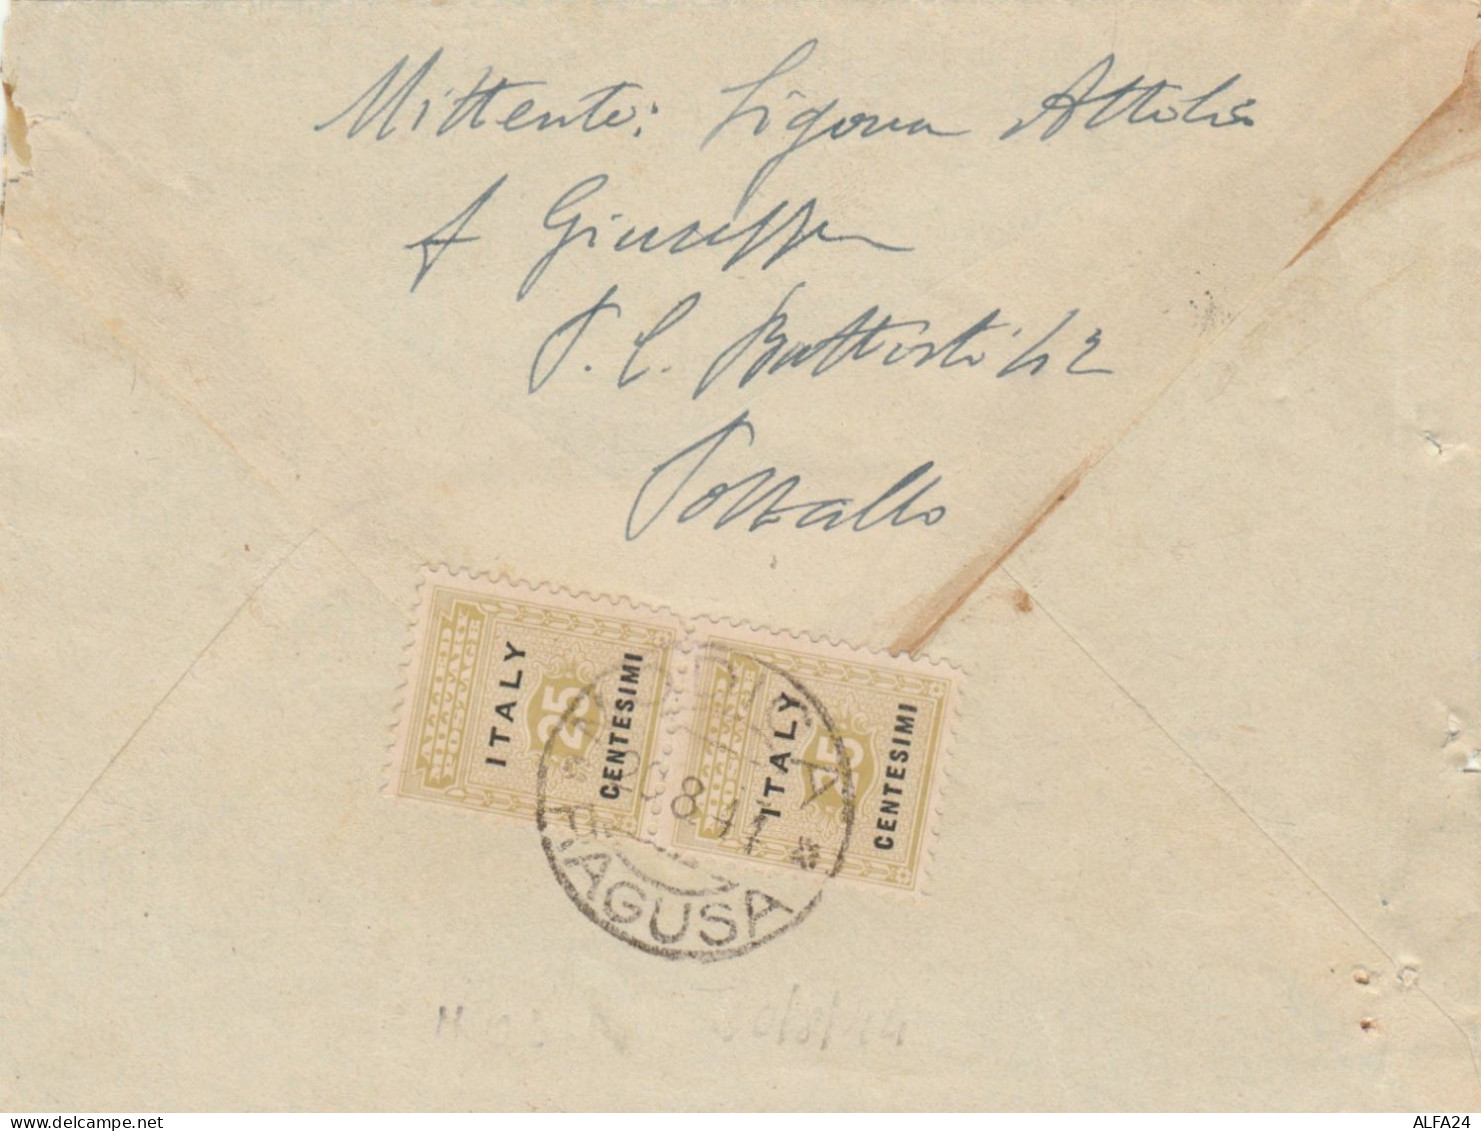 LETTERA 1944 2X25 ALLIED MILITARY POSTAGE TIMBRO RAGUSA MODICA (RY4285 - Anglo-american Occ.: Sicily